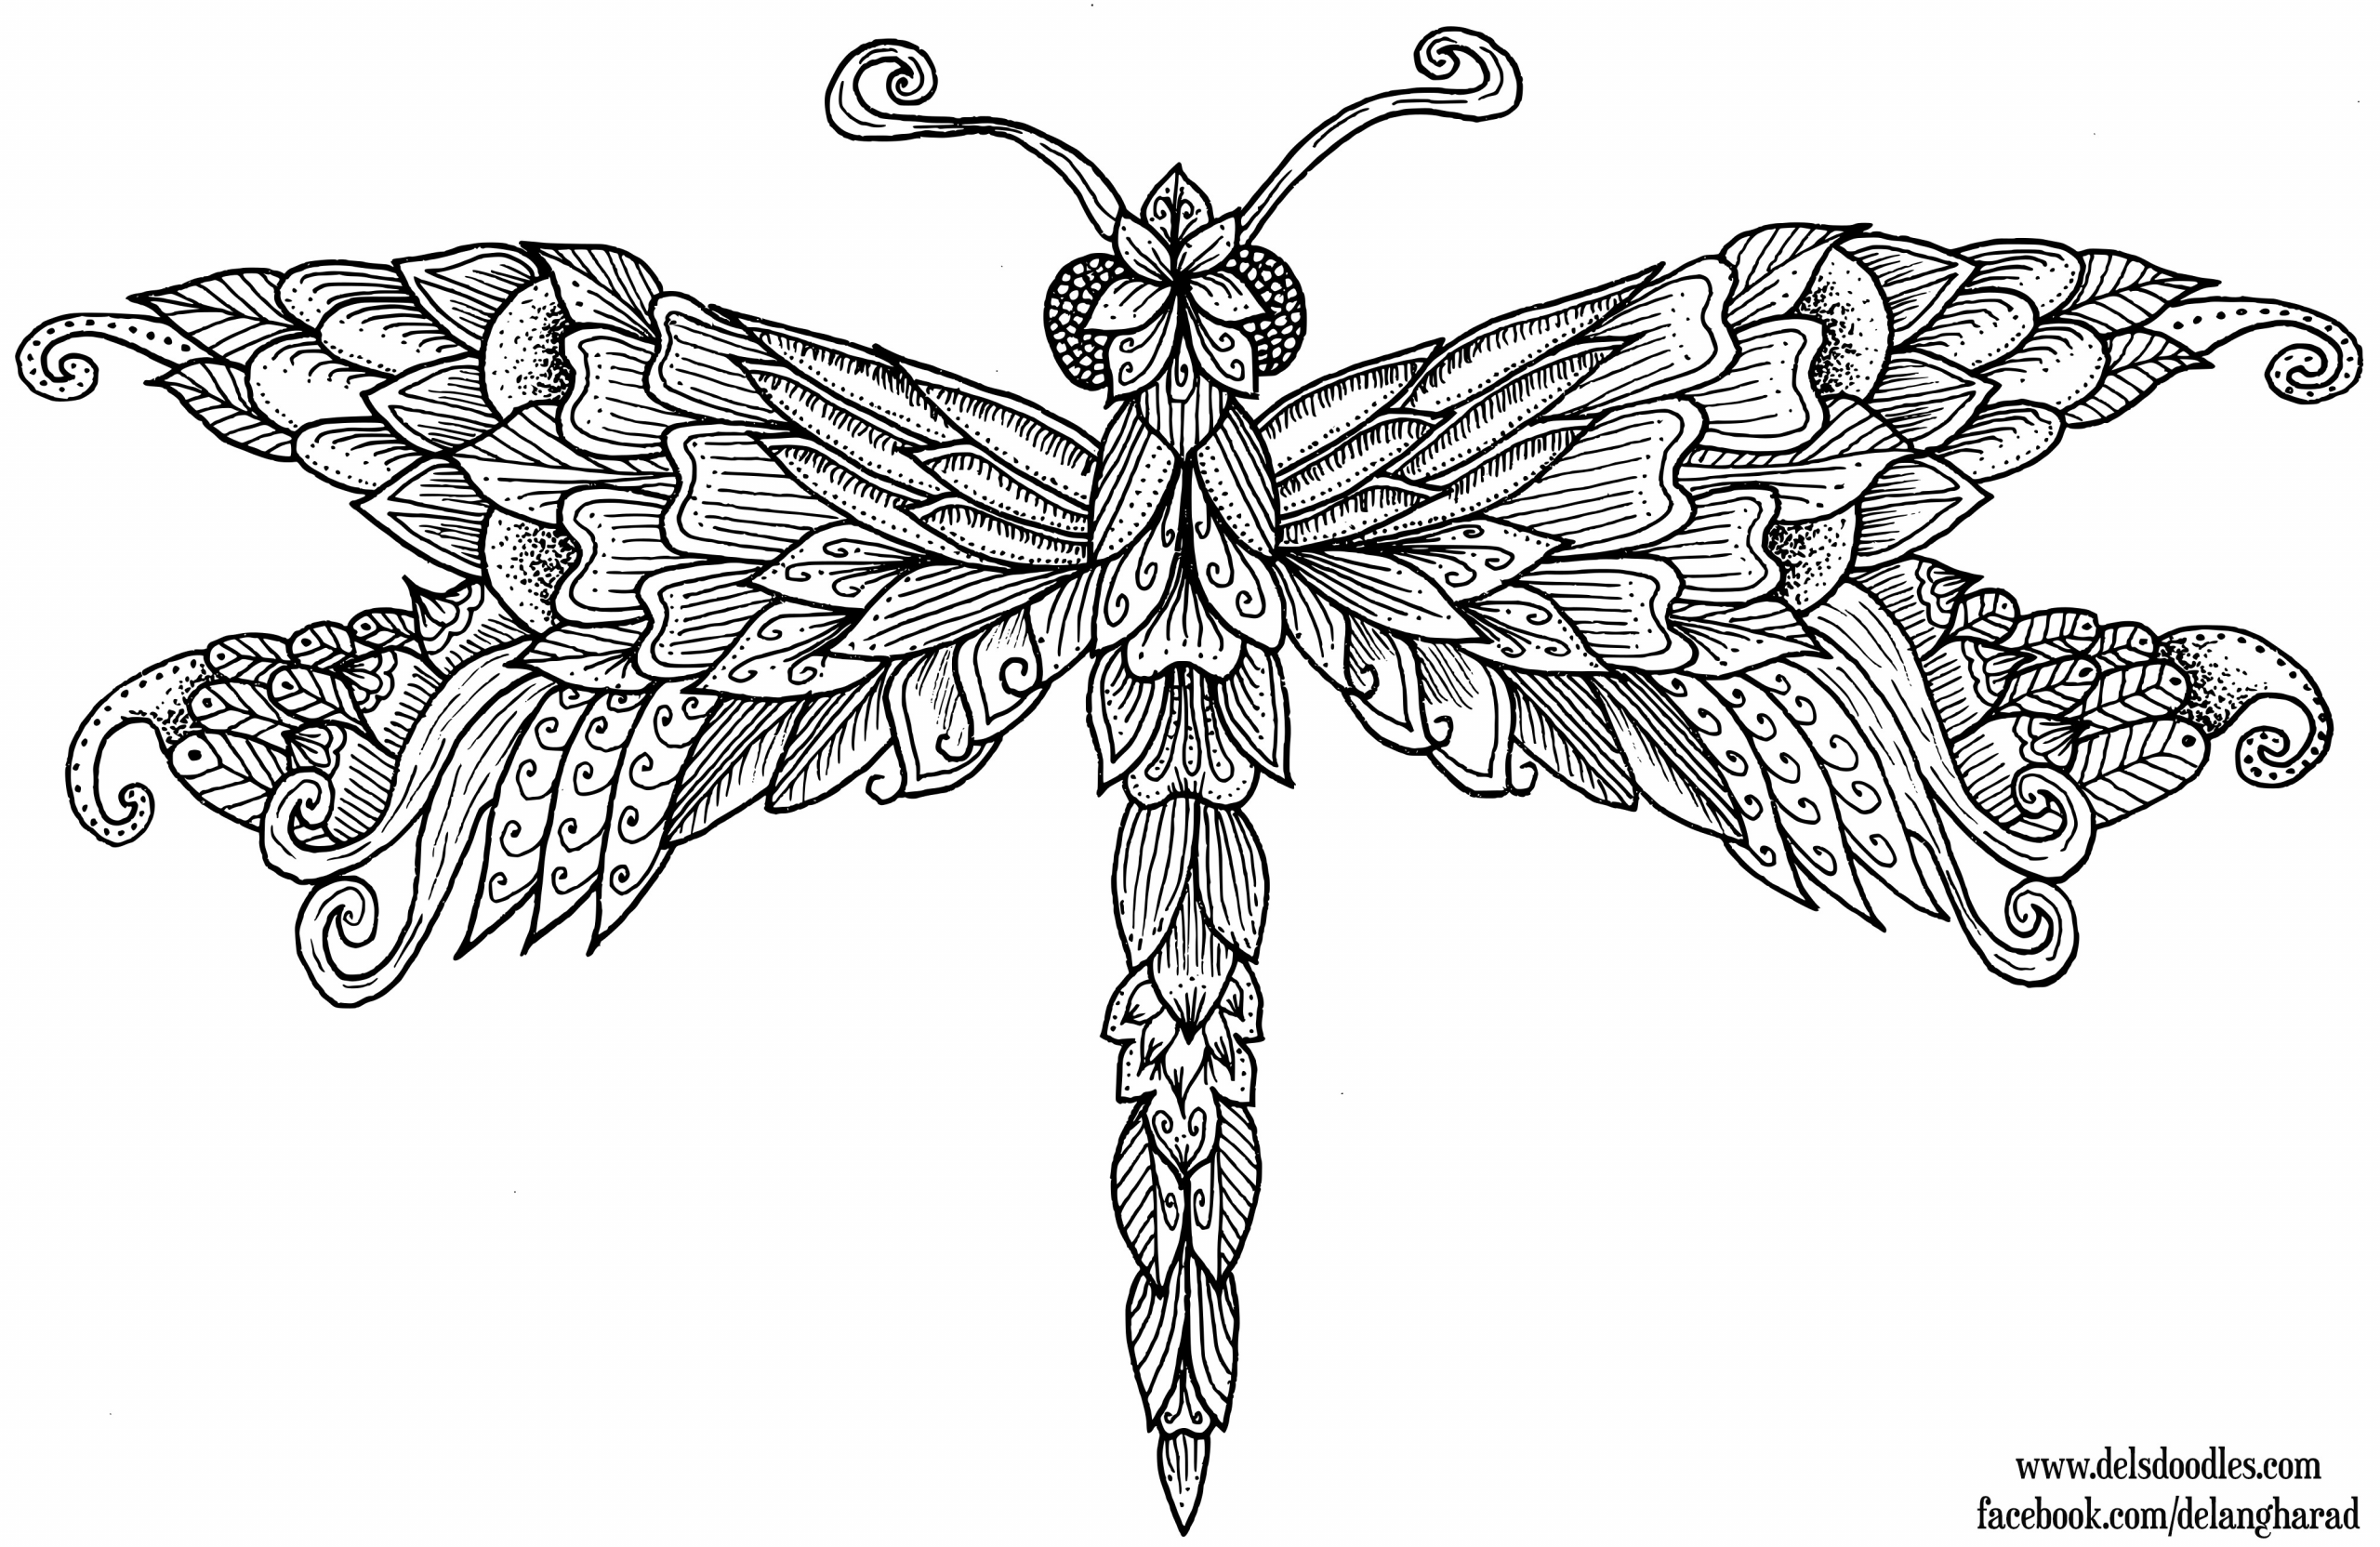 Dragonfly Coloring Pages For Adults
 Dragonfly Colouring Page by WelshPixie on DeviantArt